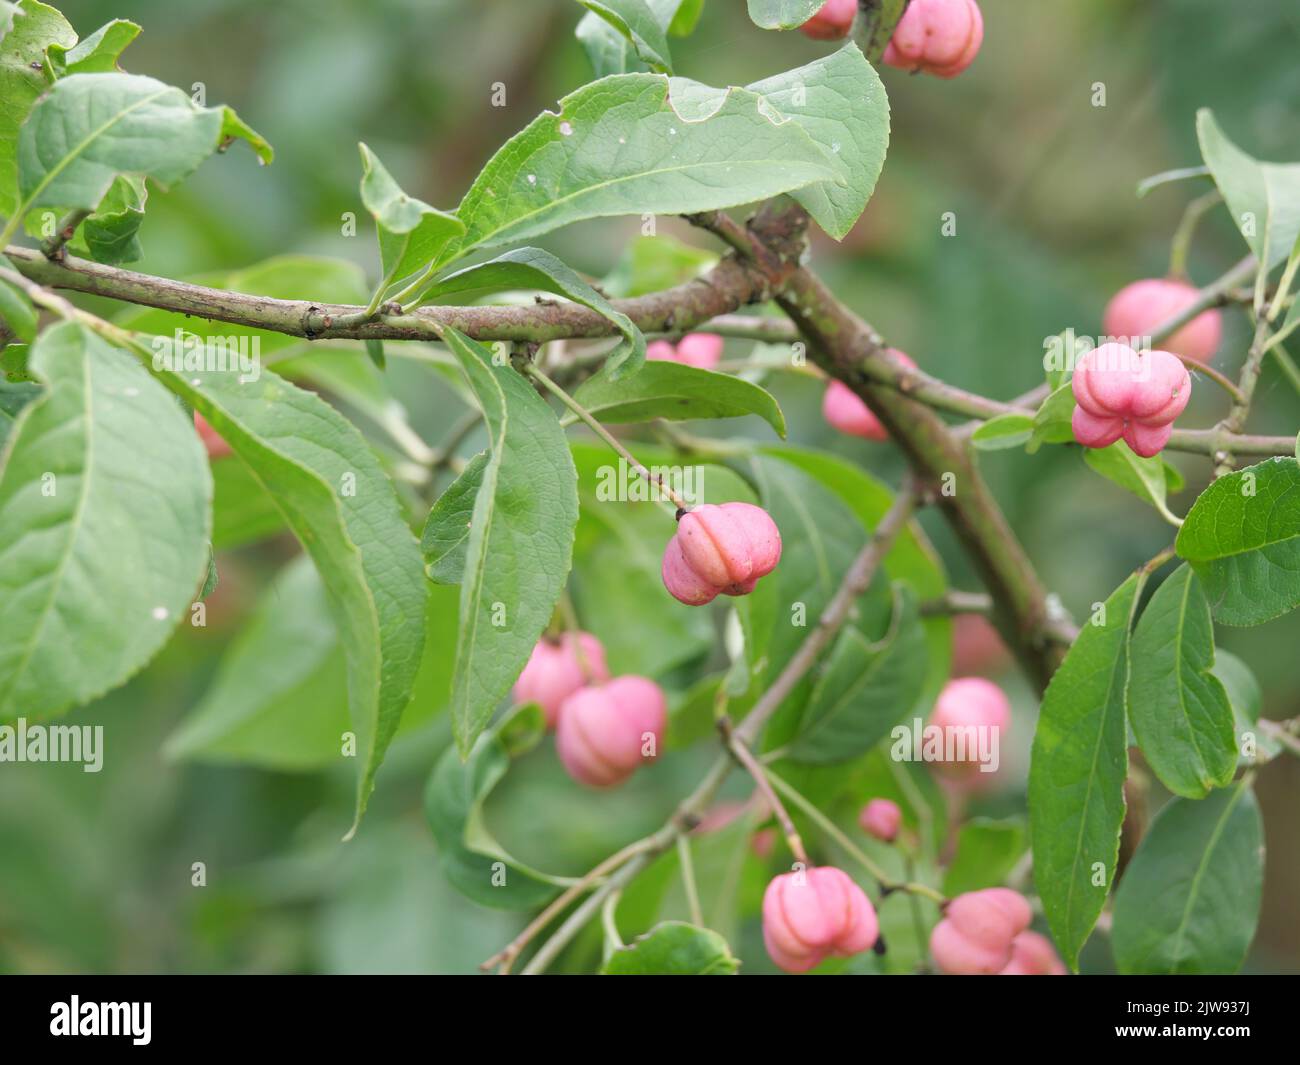 The red fruits of the euonymus, Euonymus europaea, and the green leaves in September Stock Photo